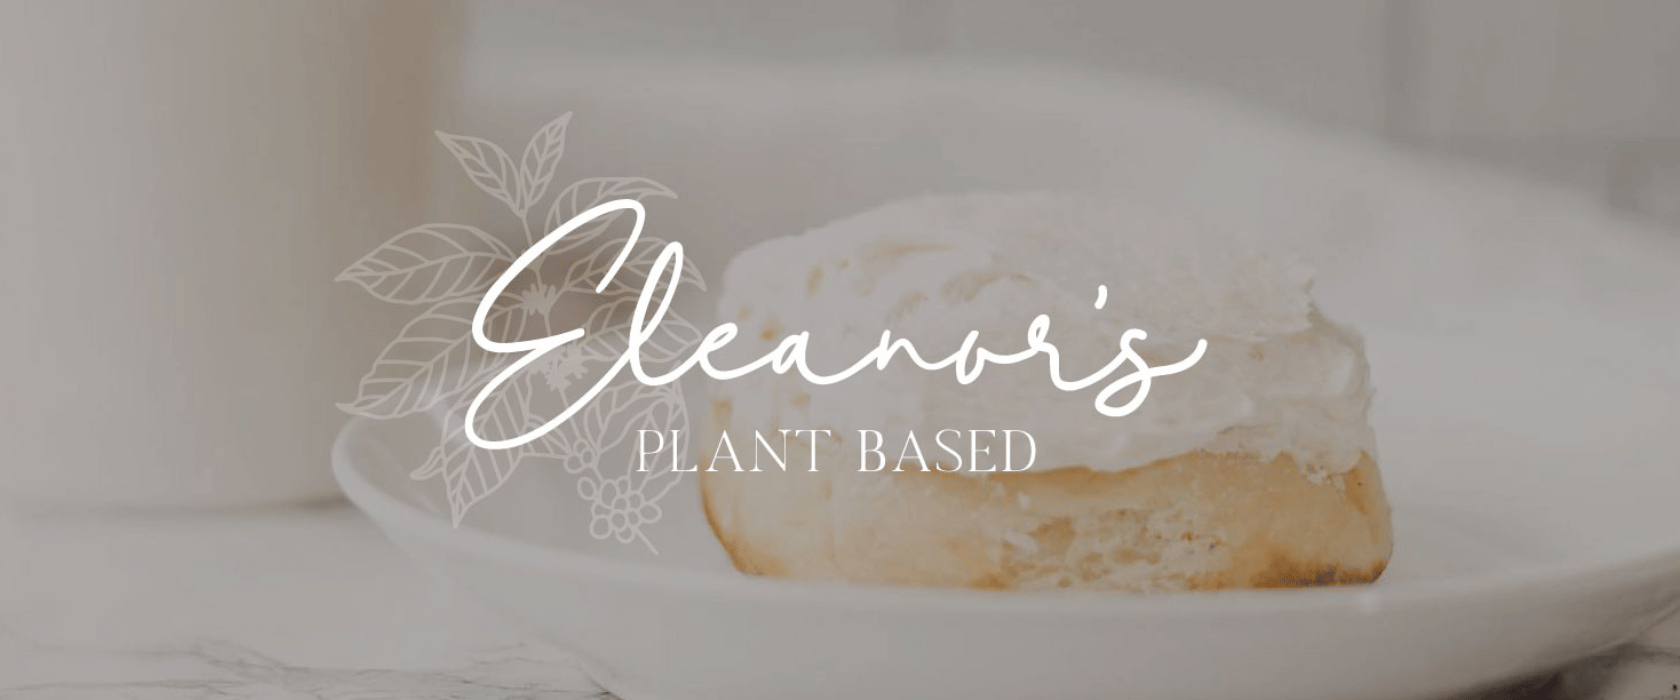 Eleanor's Plant Based logo in white script over image of a frosted cinnamon roll